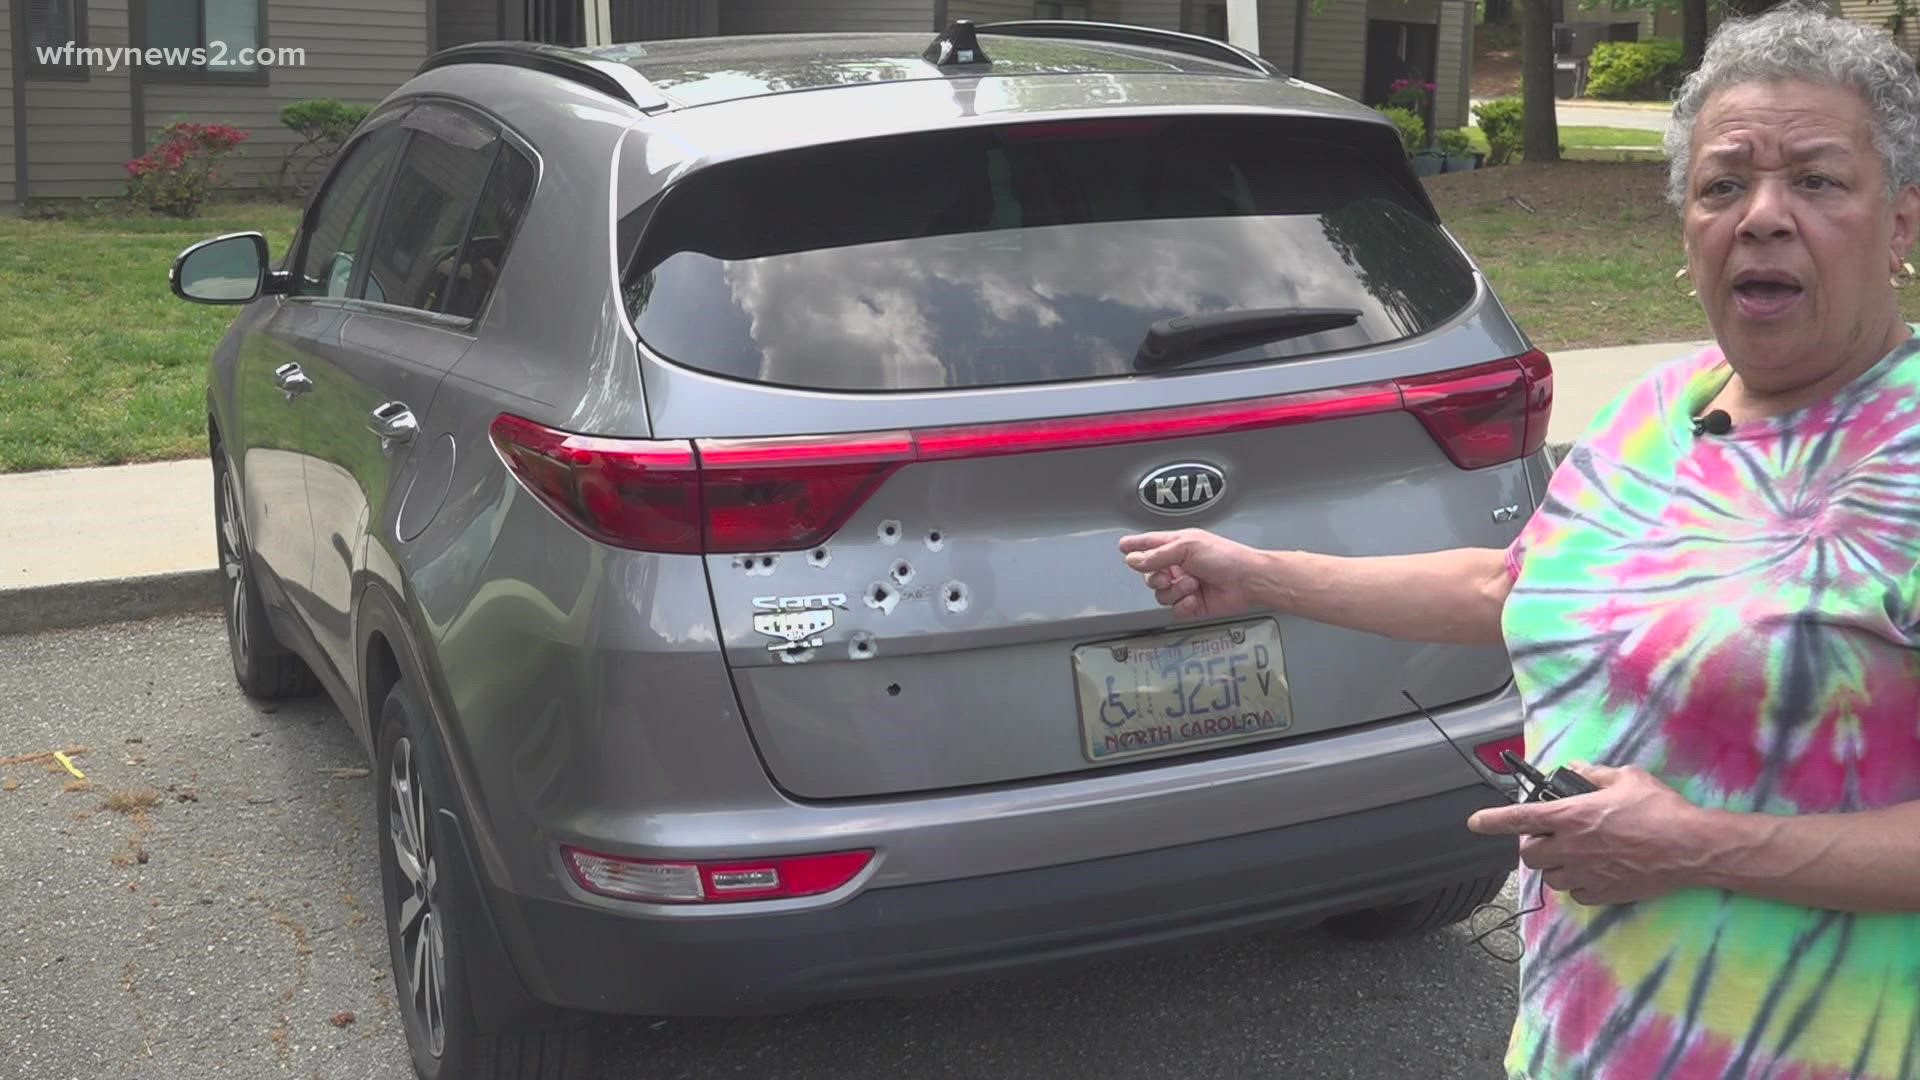 A Greensboro woman is upset after waking up to find her car riddled with bullet holes.